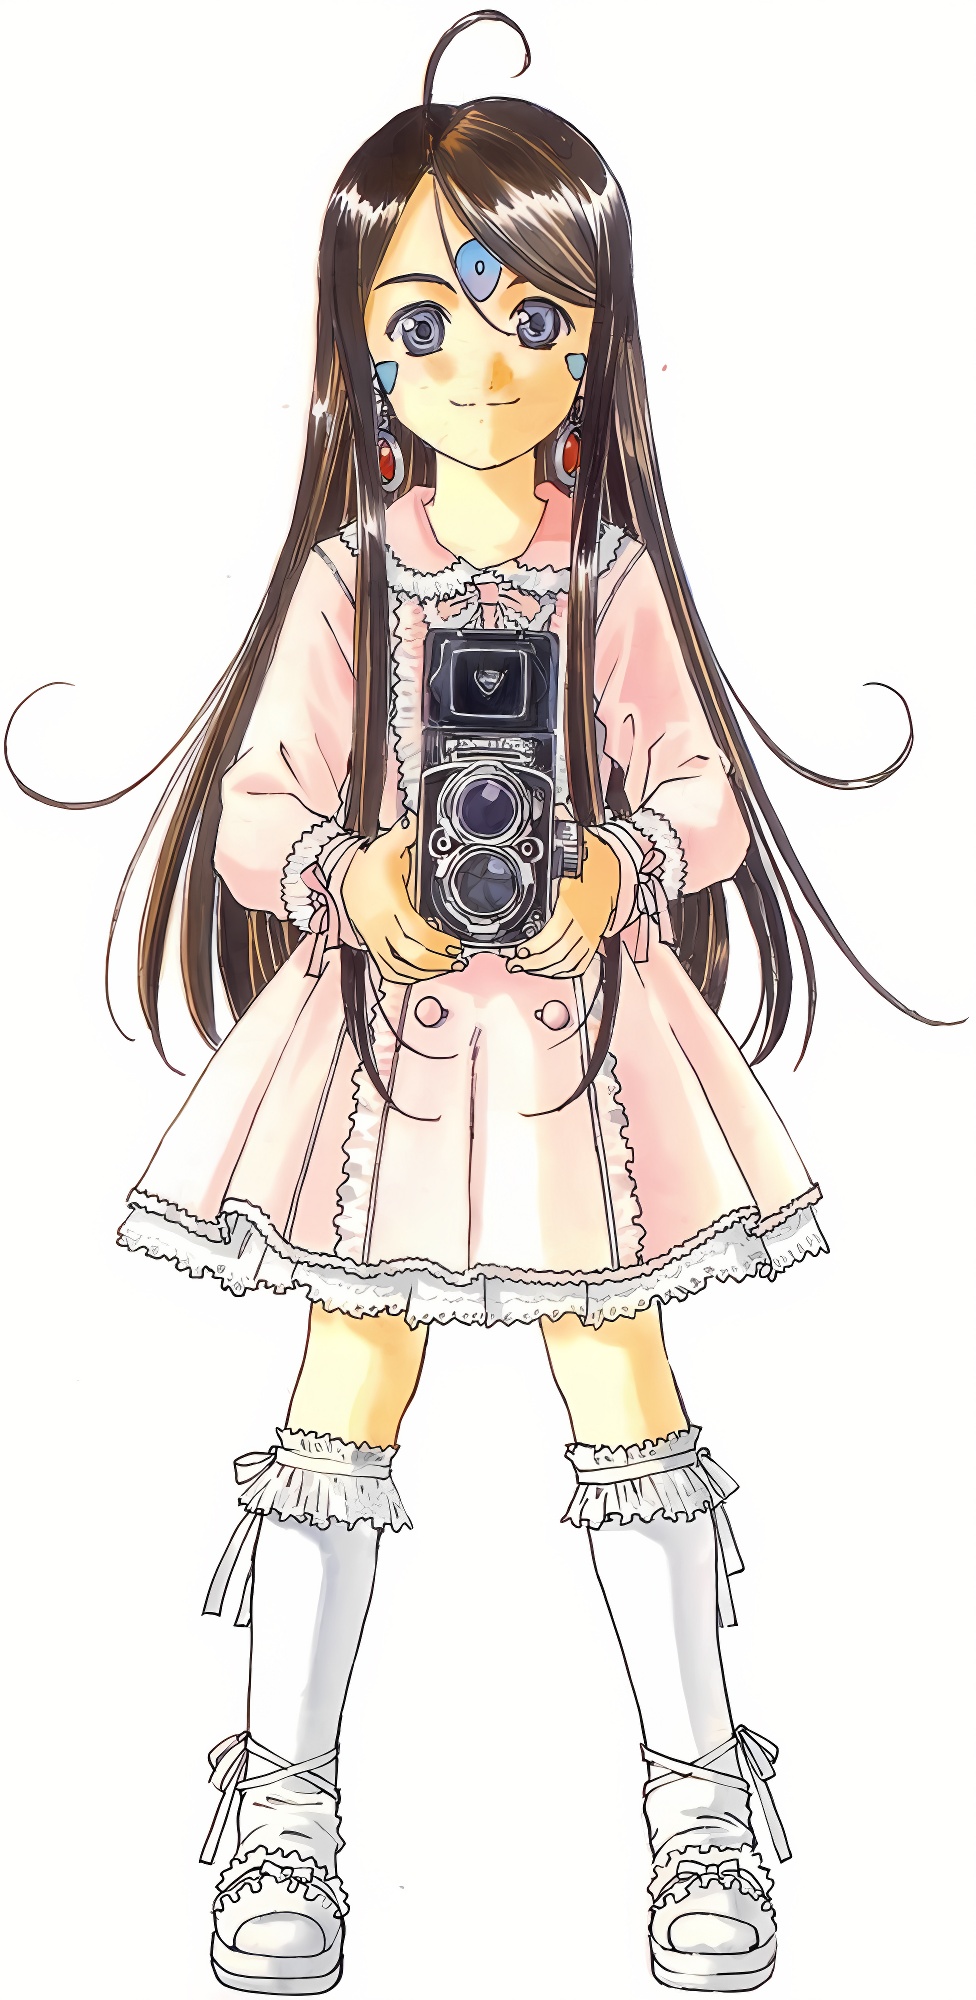 1990s_(style) 1girl aa_megami-sama ah_my_goddess ahoge buttons camera dark_hair dress earrings facial_mark forehead_mark frilled_dress frilled_socks goddess happy holding_camera leica_(camera) long_hair looking_at_viewer official_art pearl_earrings pink_dress ribbons shoes skuld smiling socks solo white_background white_shoes